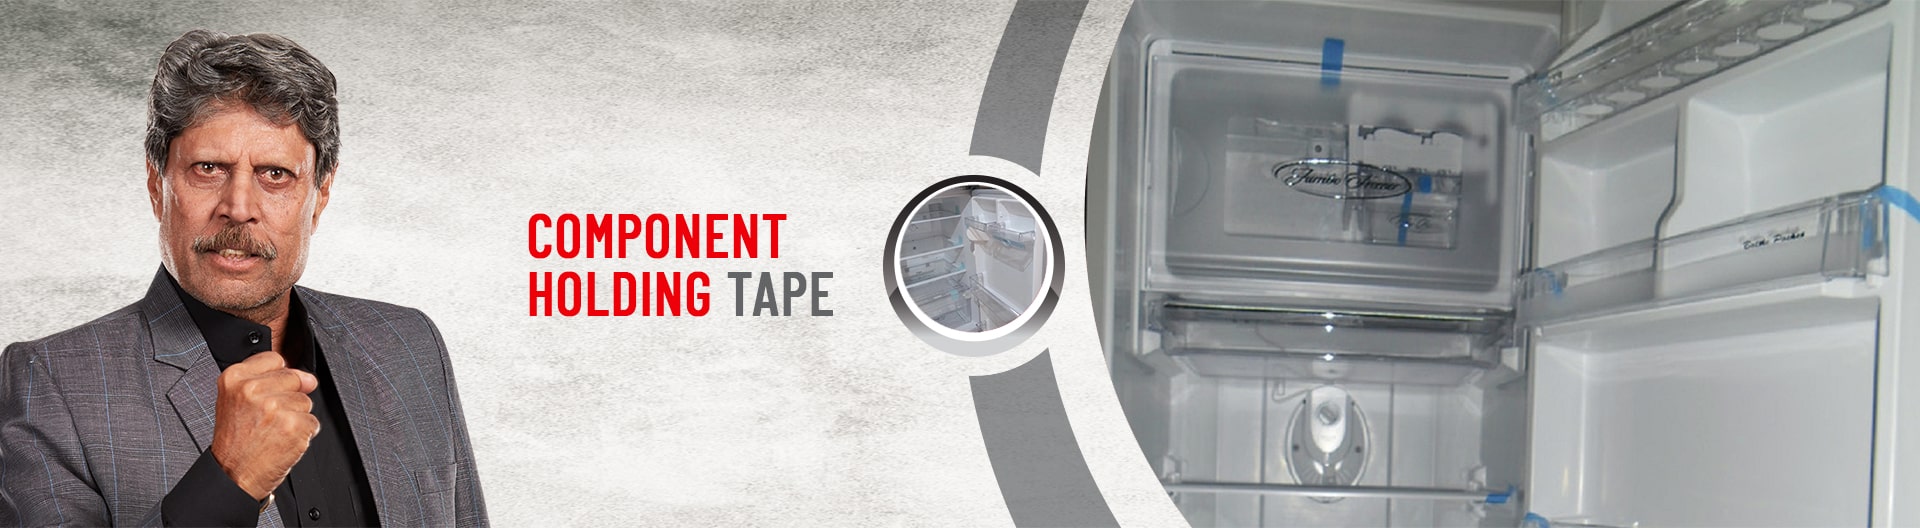 Component holding tape